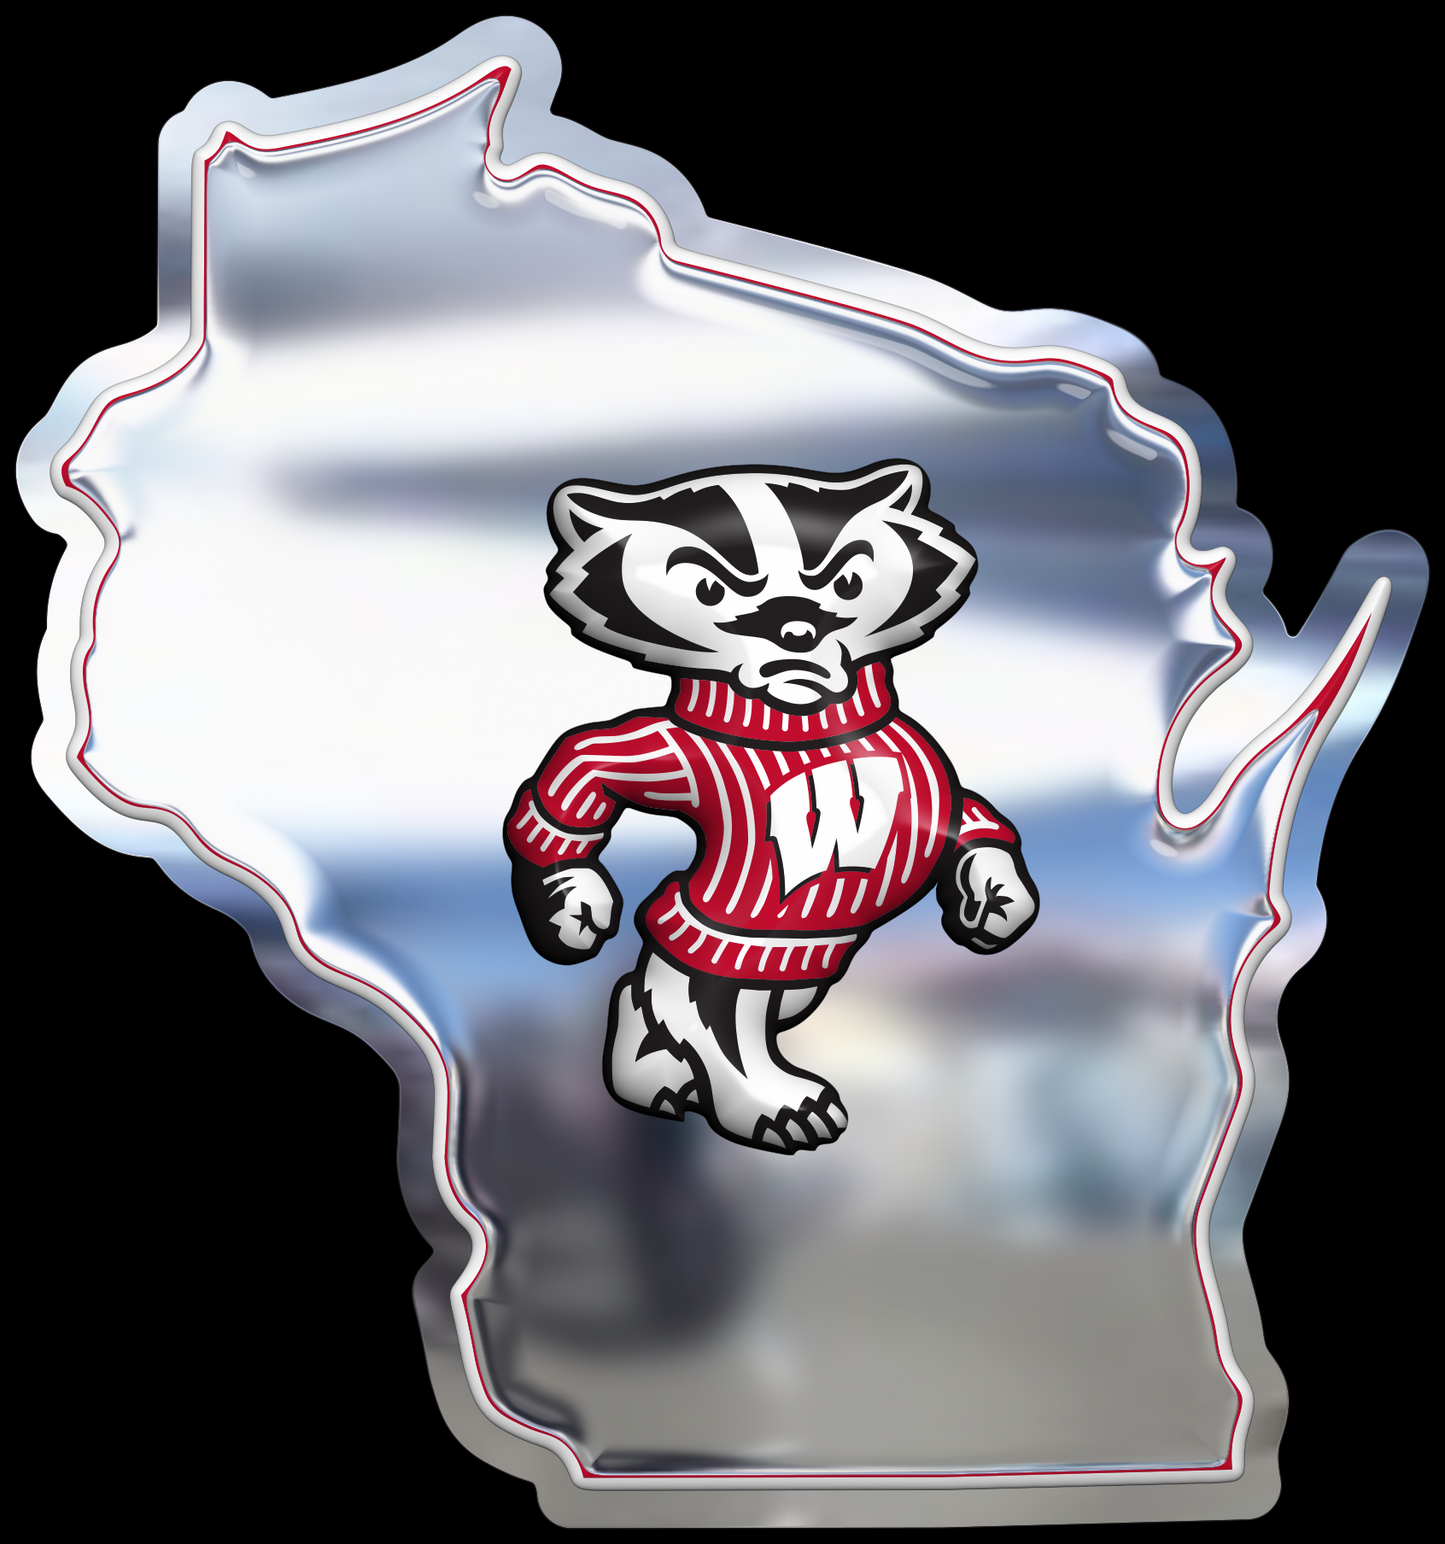 embossed mirror polished stainless steel sign garage décor Wisconsin State-shaped Bucky Badger chrome